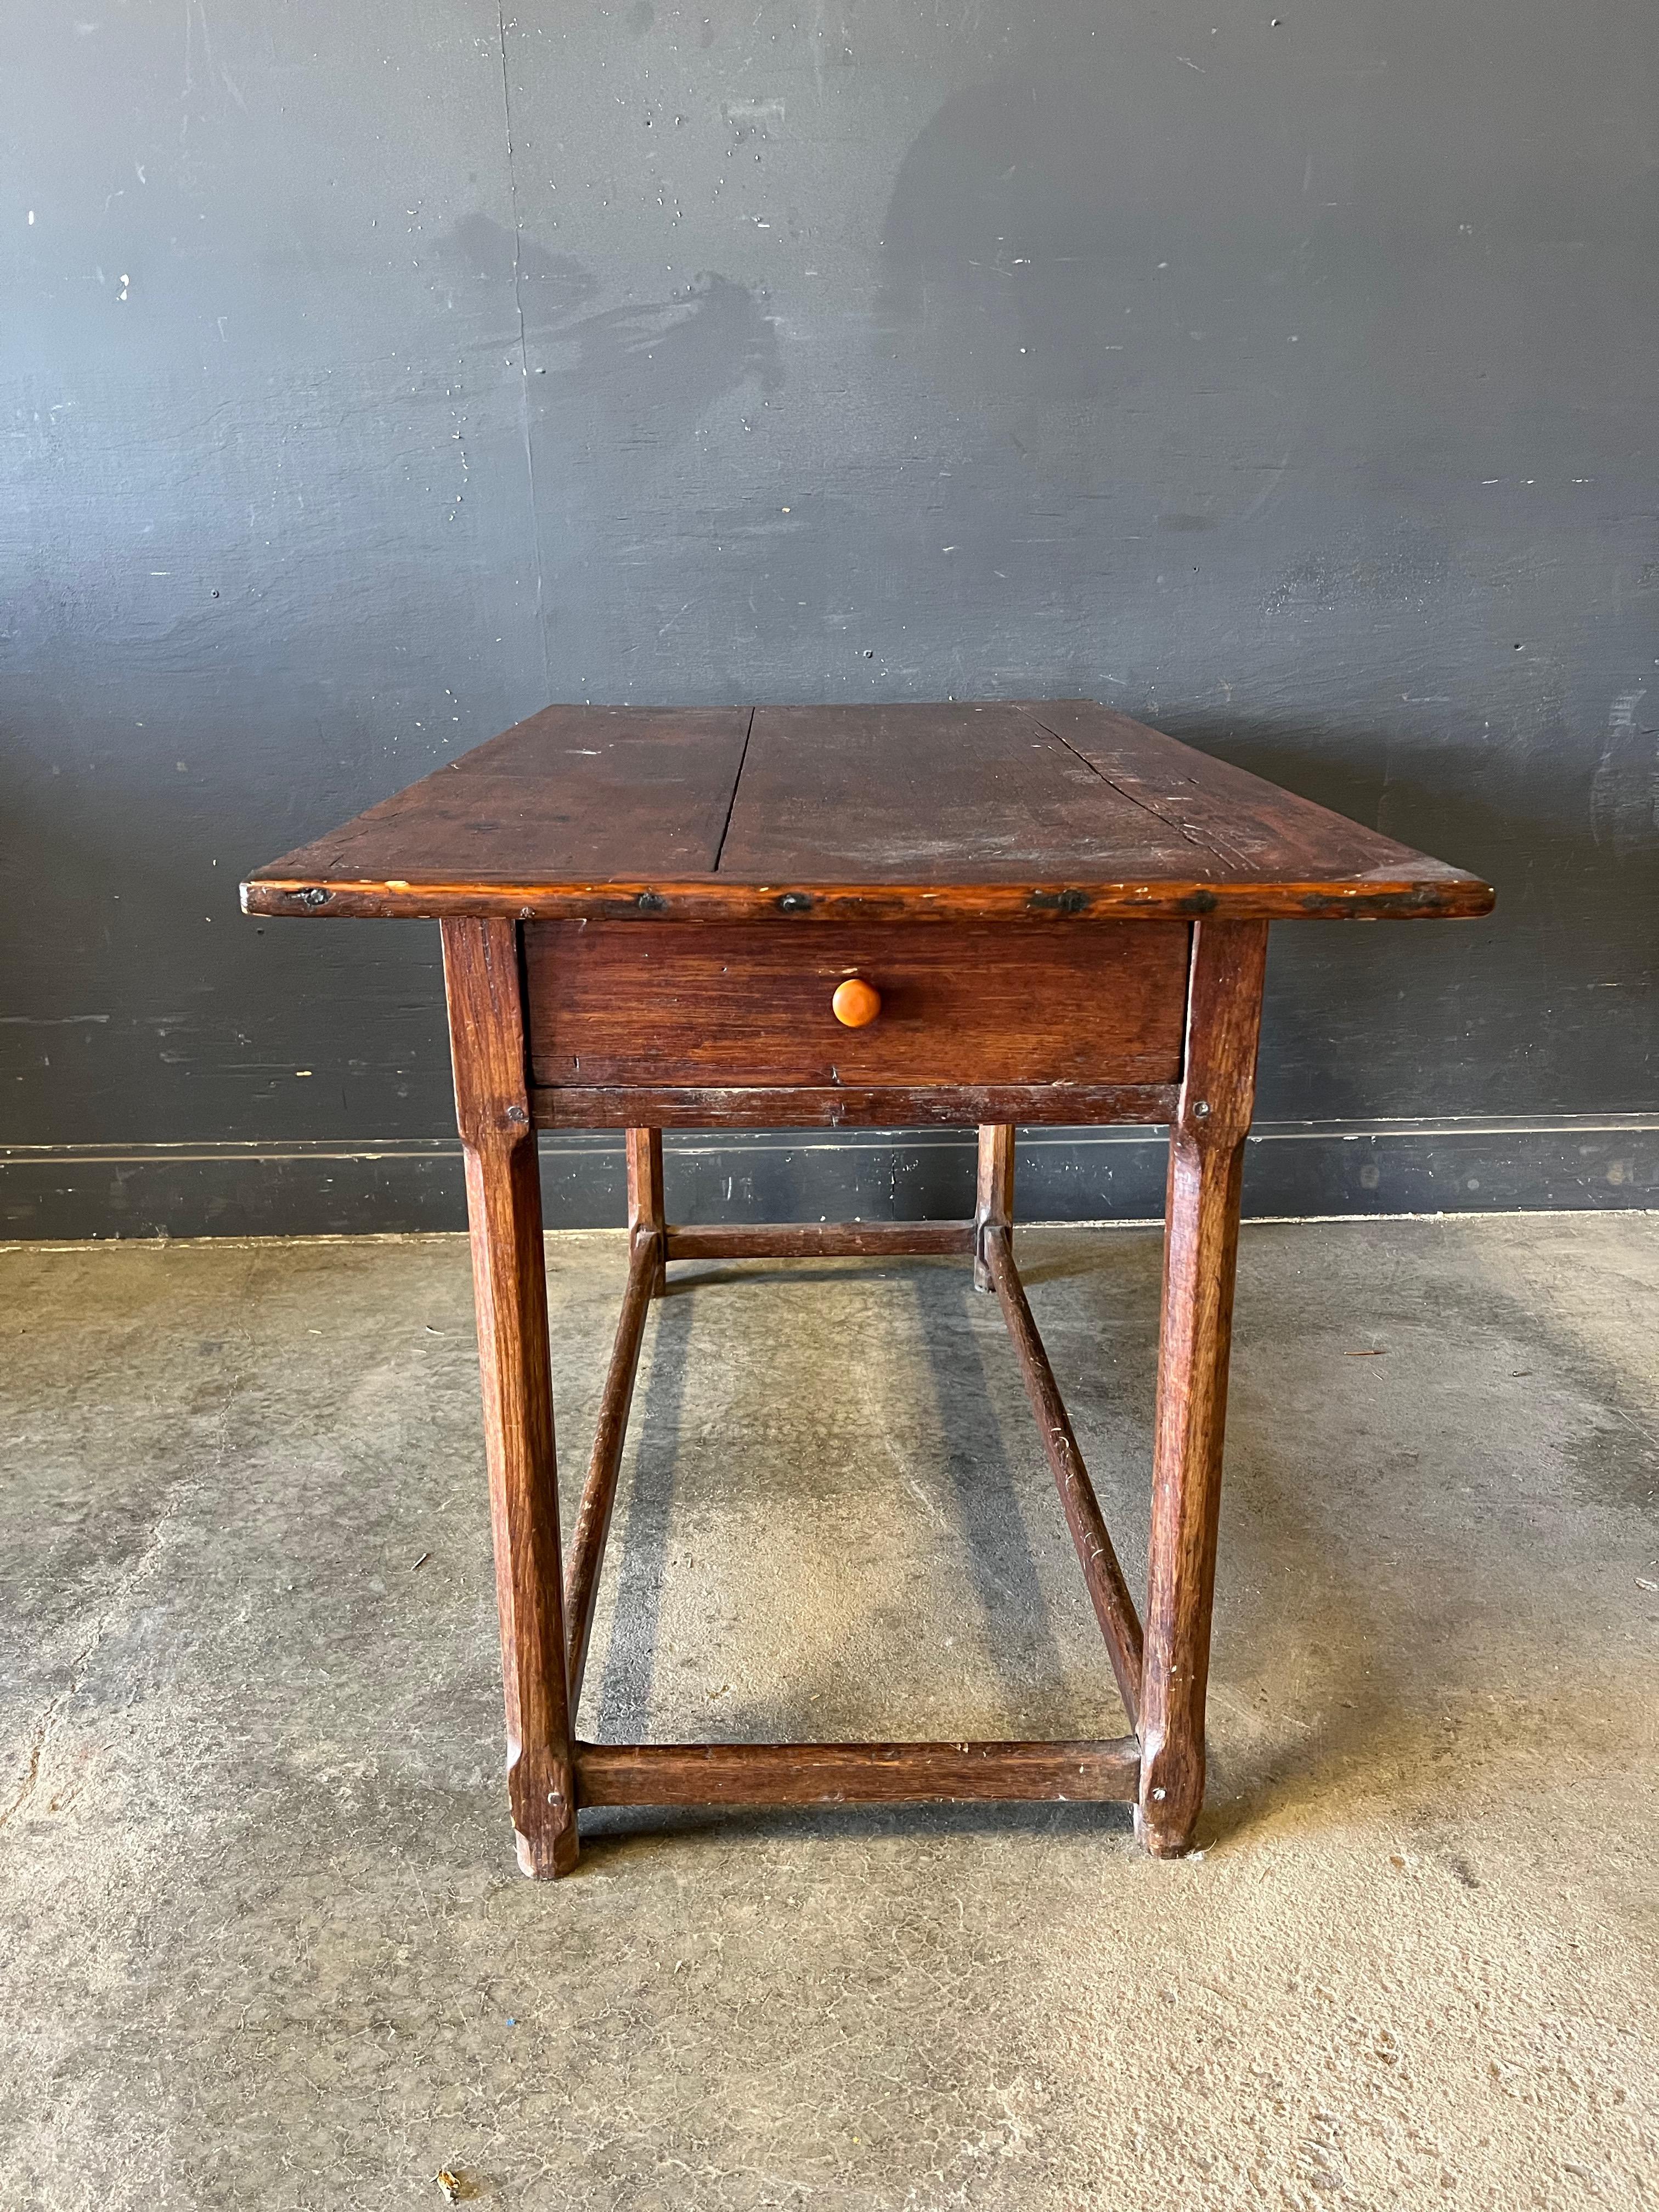 Early Hudson Vally Country Table or Desk with Drawers and Stretchers. Charming table with stretchers all around base and drawer on one side. Well worn top with square nail construction showing 19th century fabrication.